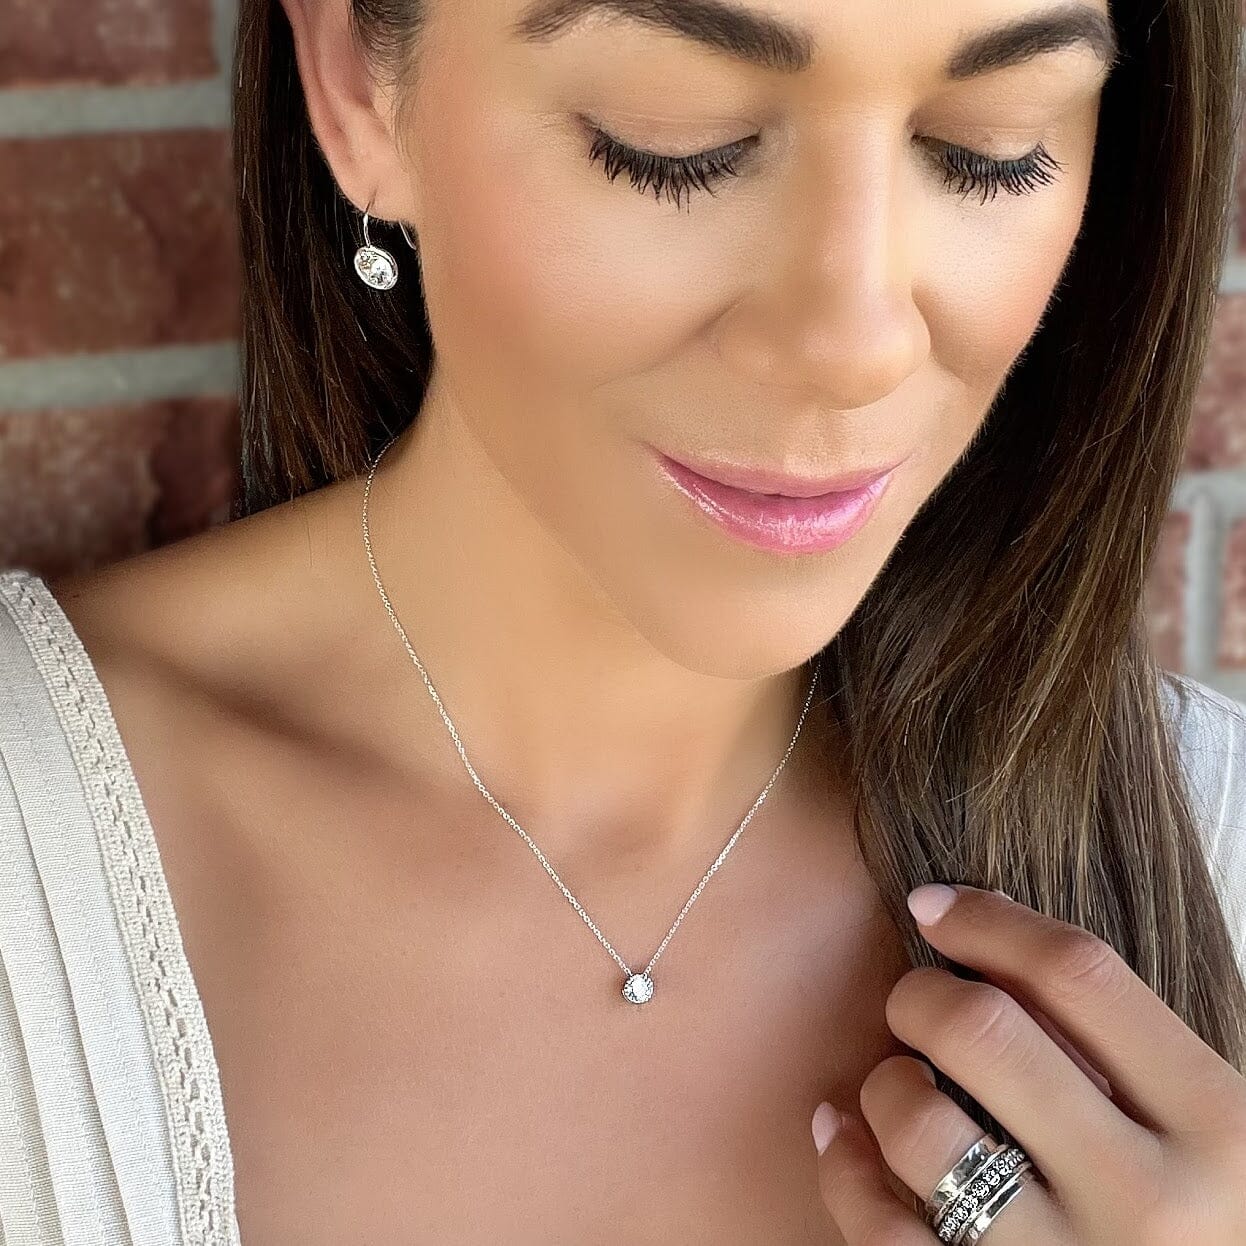 Ain't She Sweet cz necklace paired with Sterling silver earrings and ring